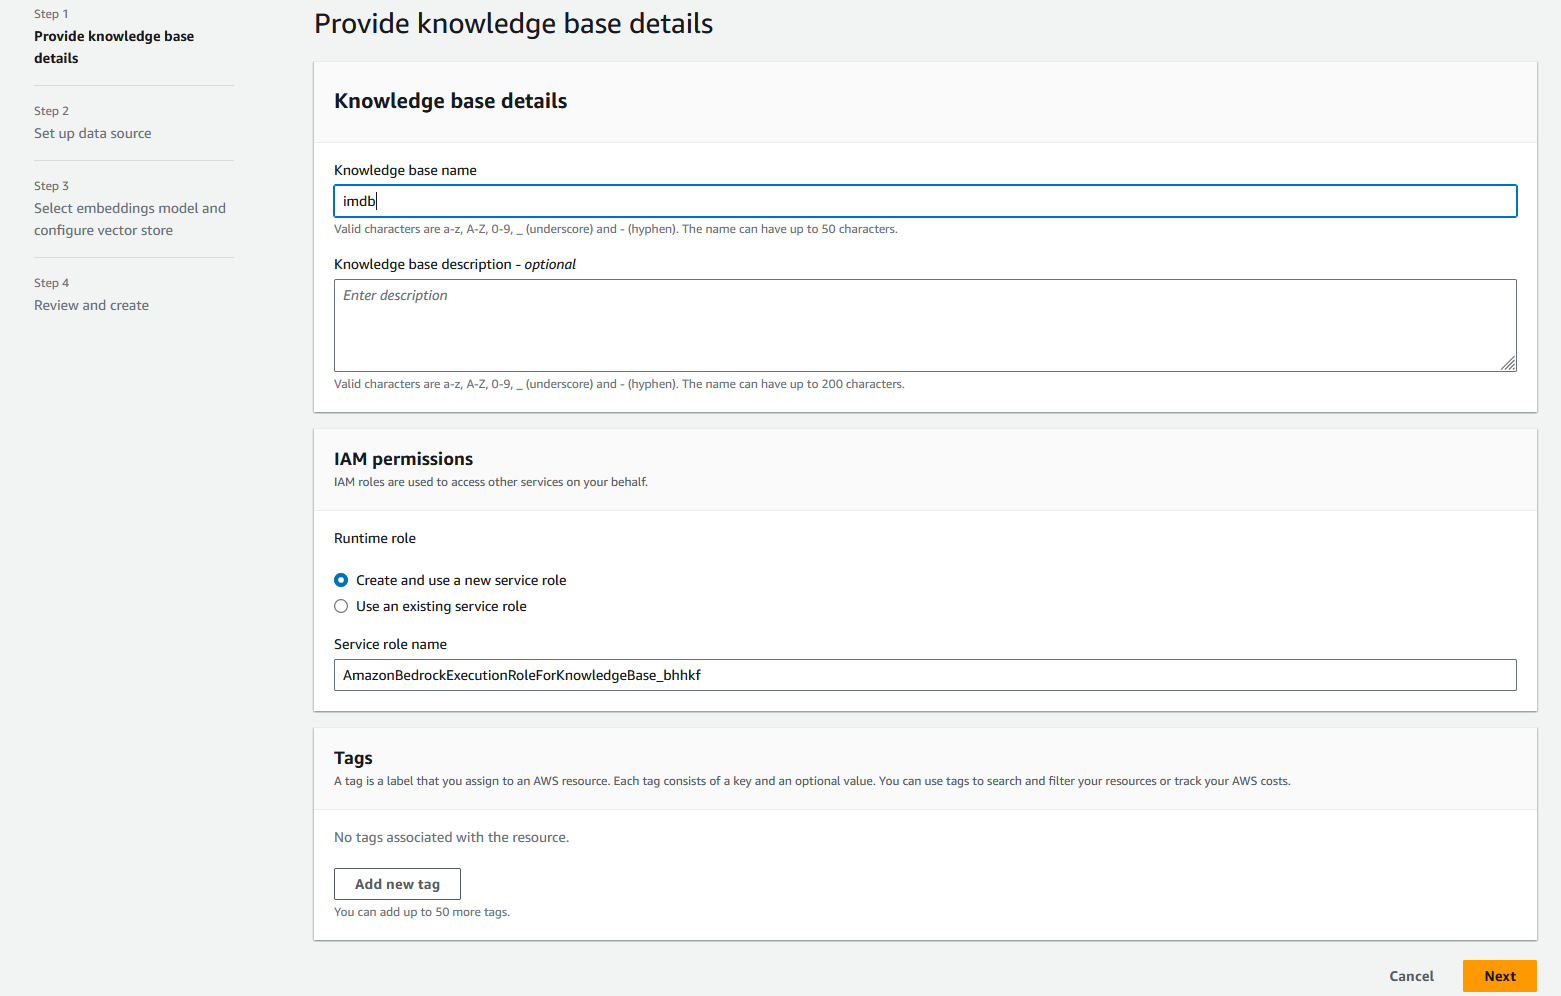 knowledge base details console page